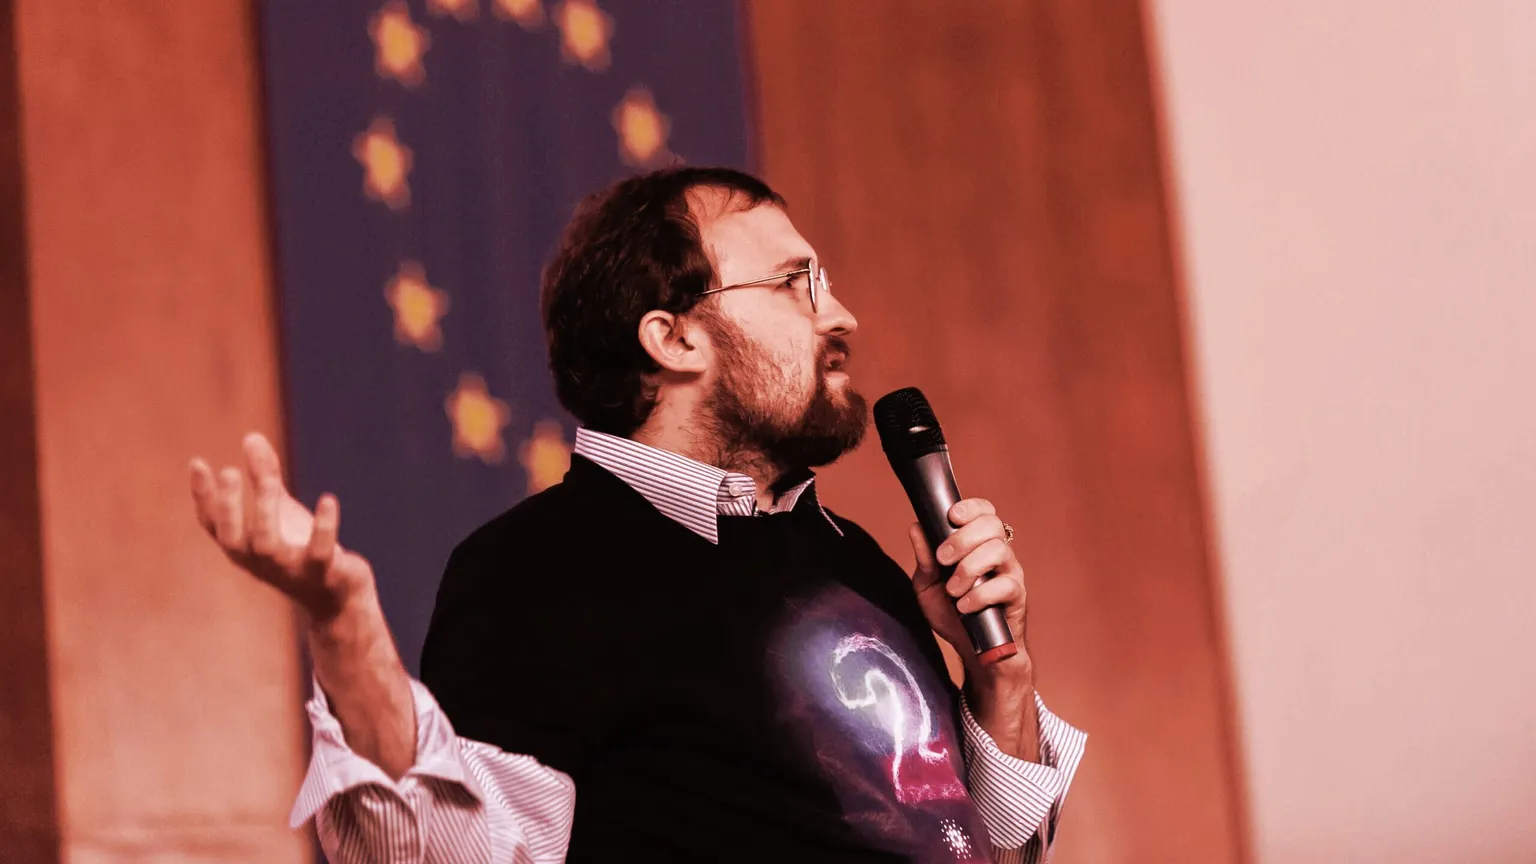 Charles Hoskinson, speaking at the Cardano Summit in Bulgaria in 2019. Image: Decrypt.